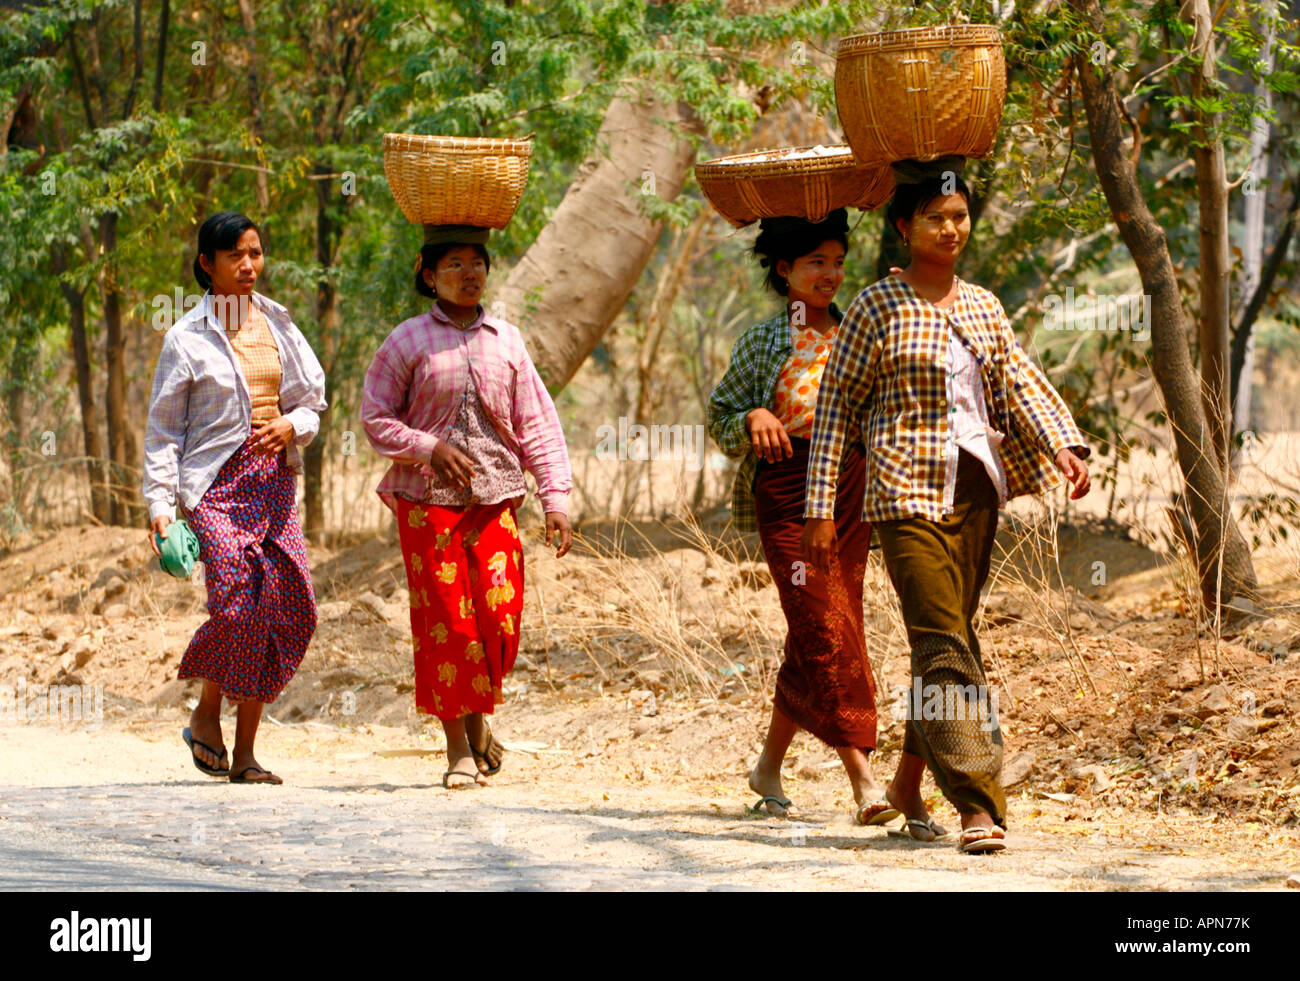 Four Burmese ladies walking down a dusty road, 3 carring baskets on their heads. Stock Photo